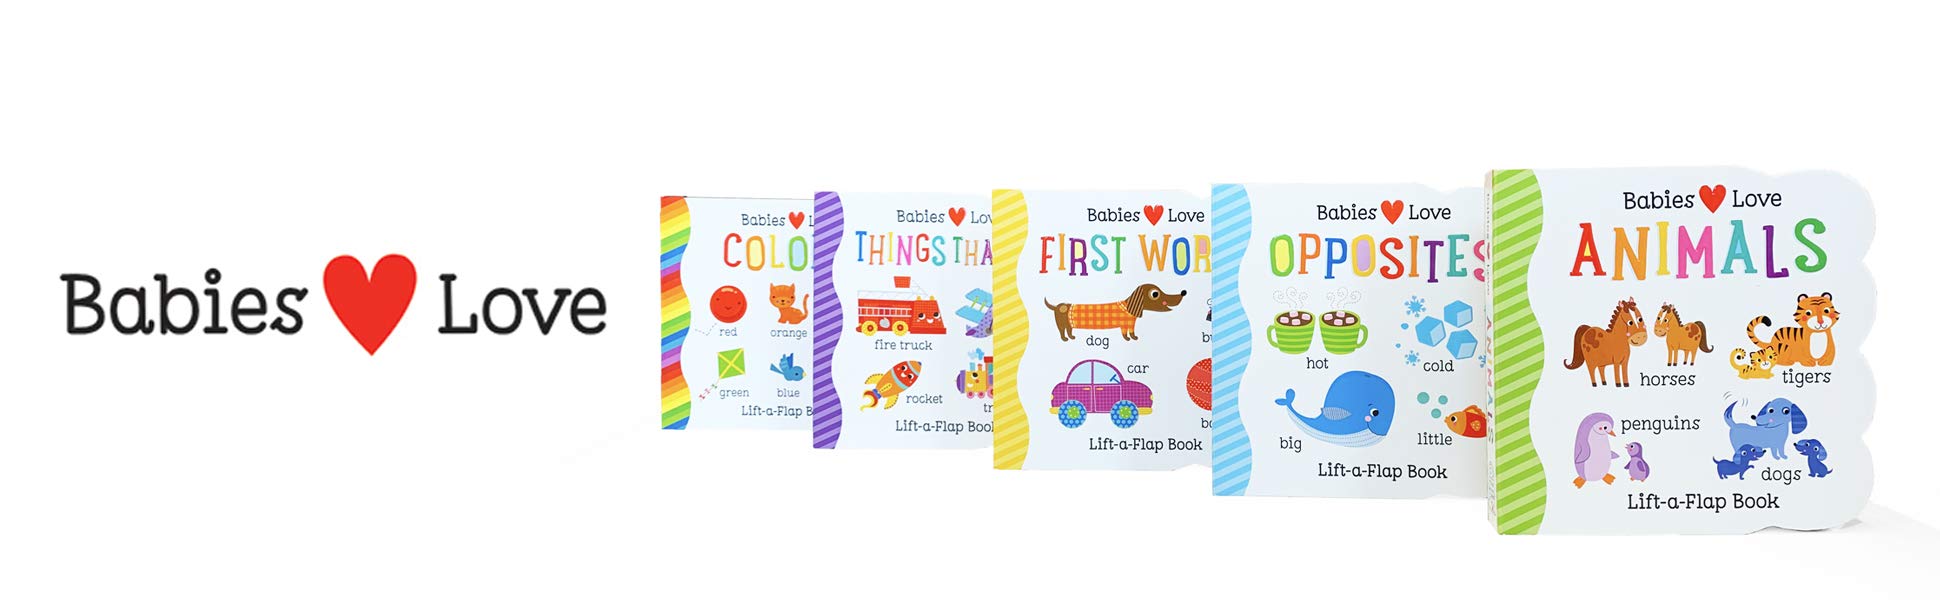 Babies Love Colors - A First Lift-a-Flap Board Book for Babies and Toddlers Learning about Colors (Chunky Lift a Flap)